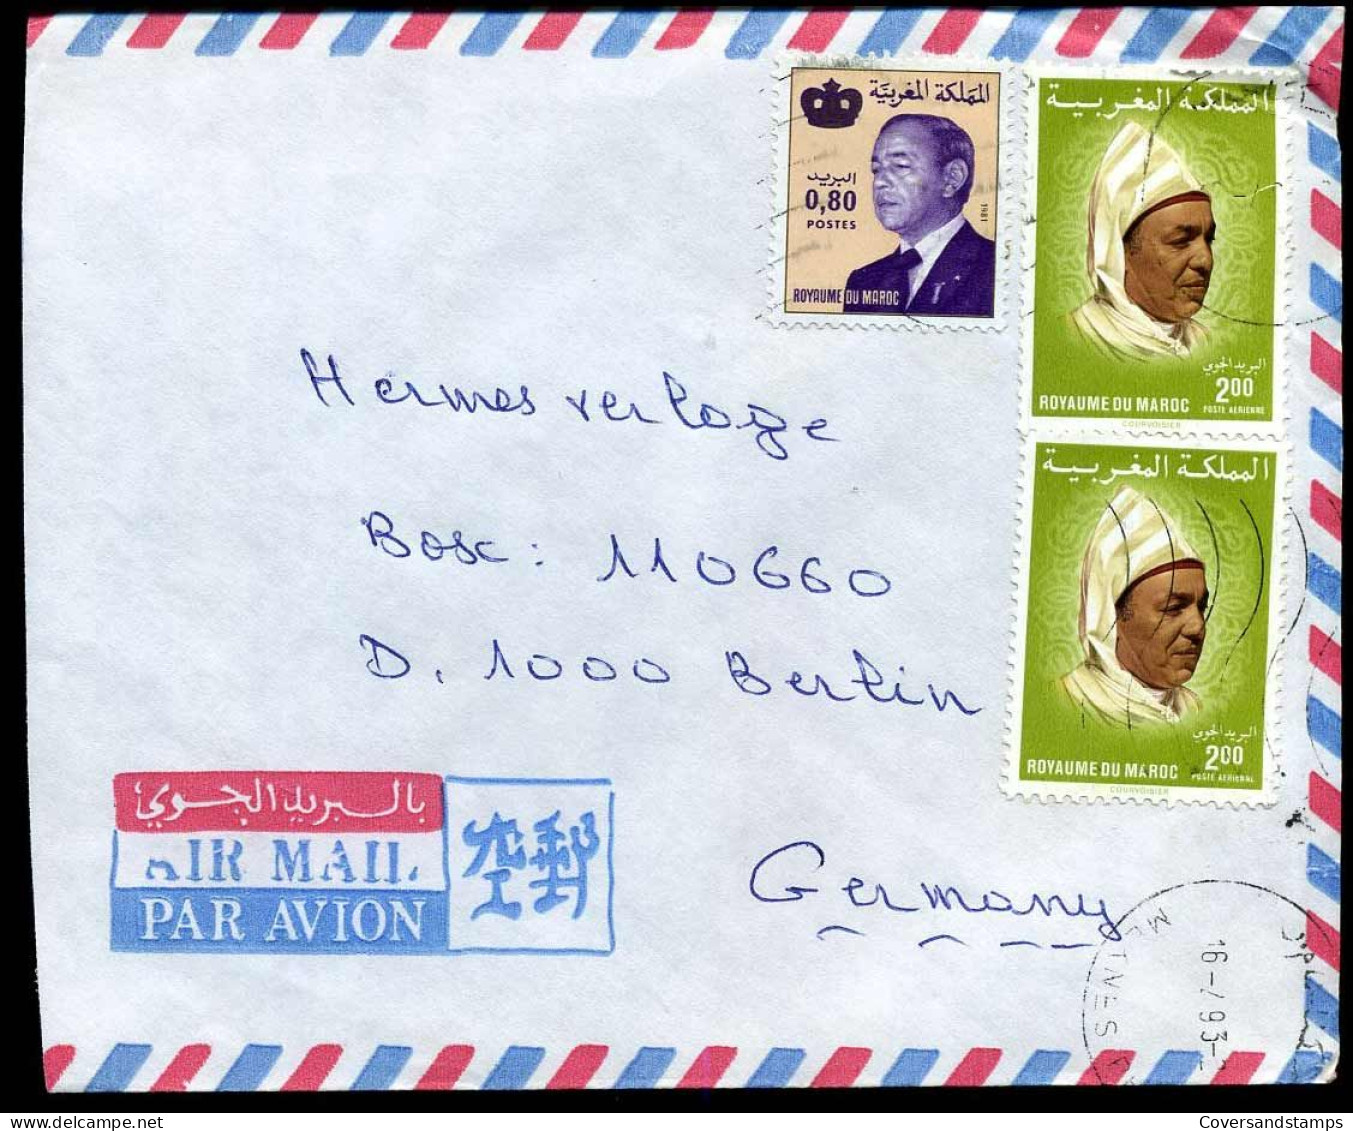 Cover To Berlin, Germany - Morocco (1956-...)